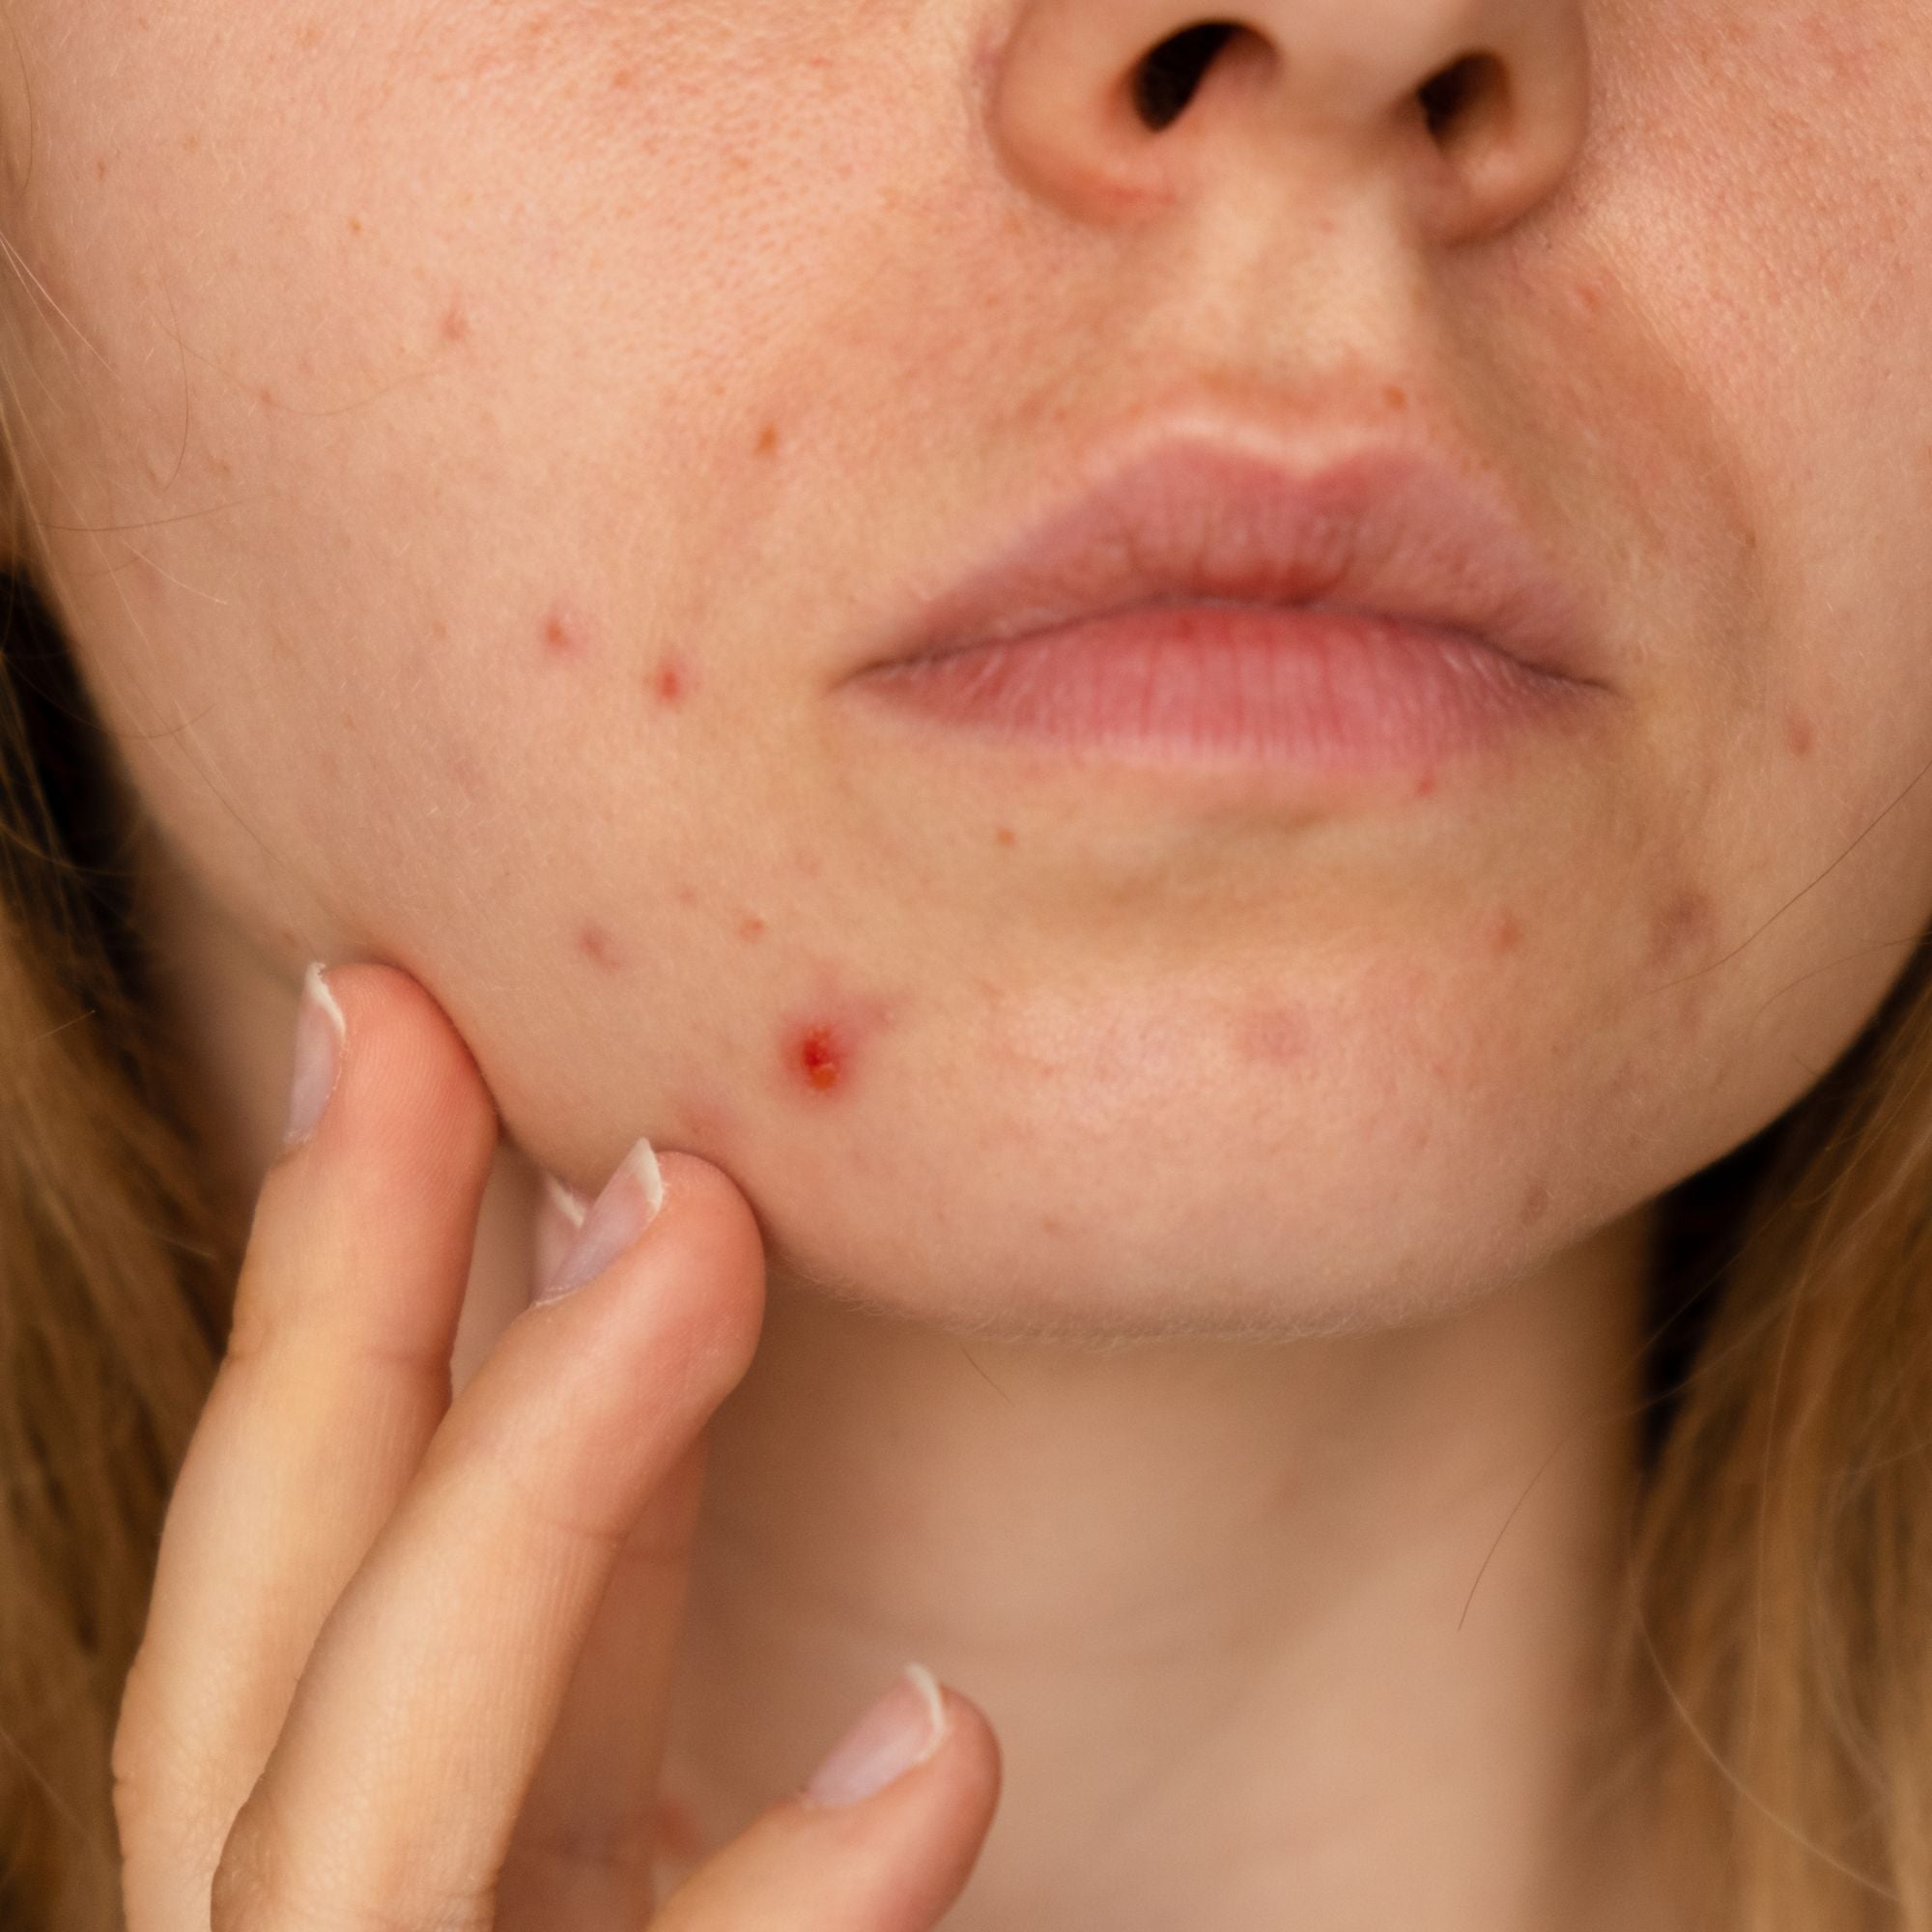 All About Infected Pimples And How To Deal With Them